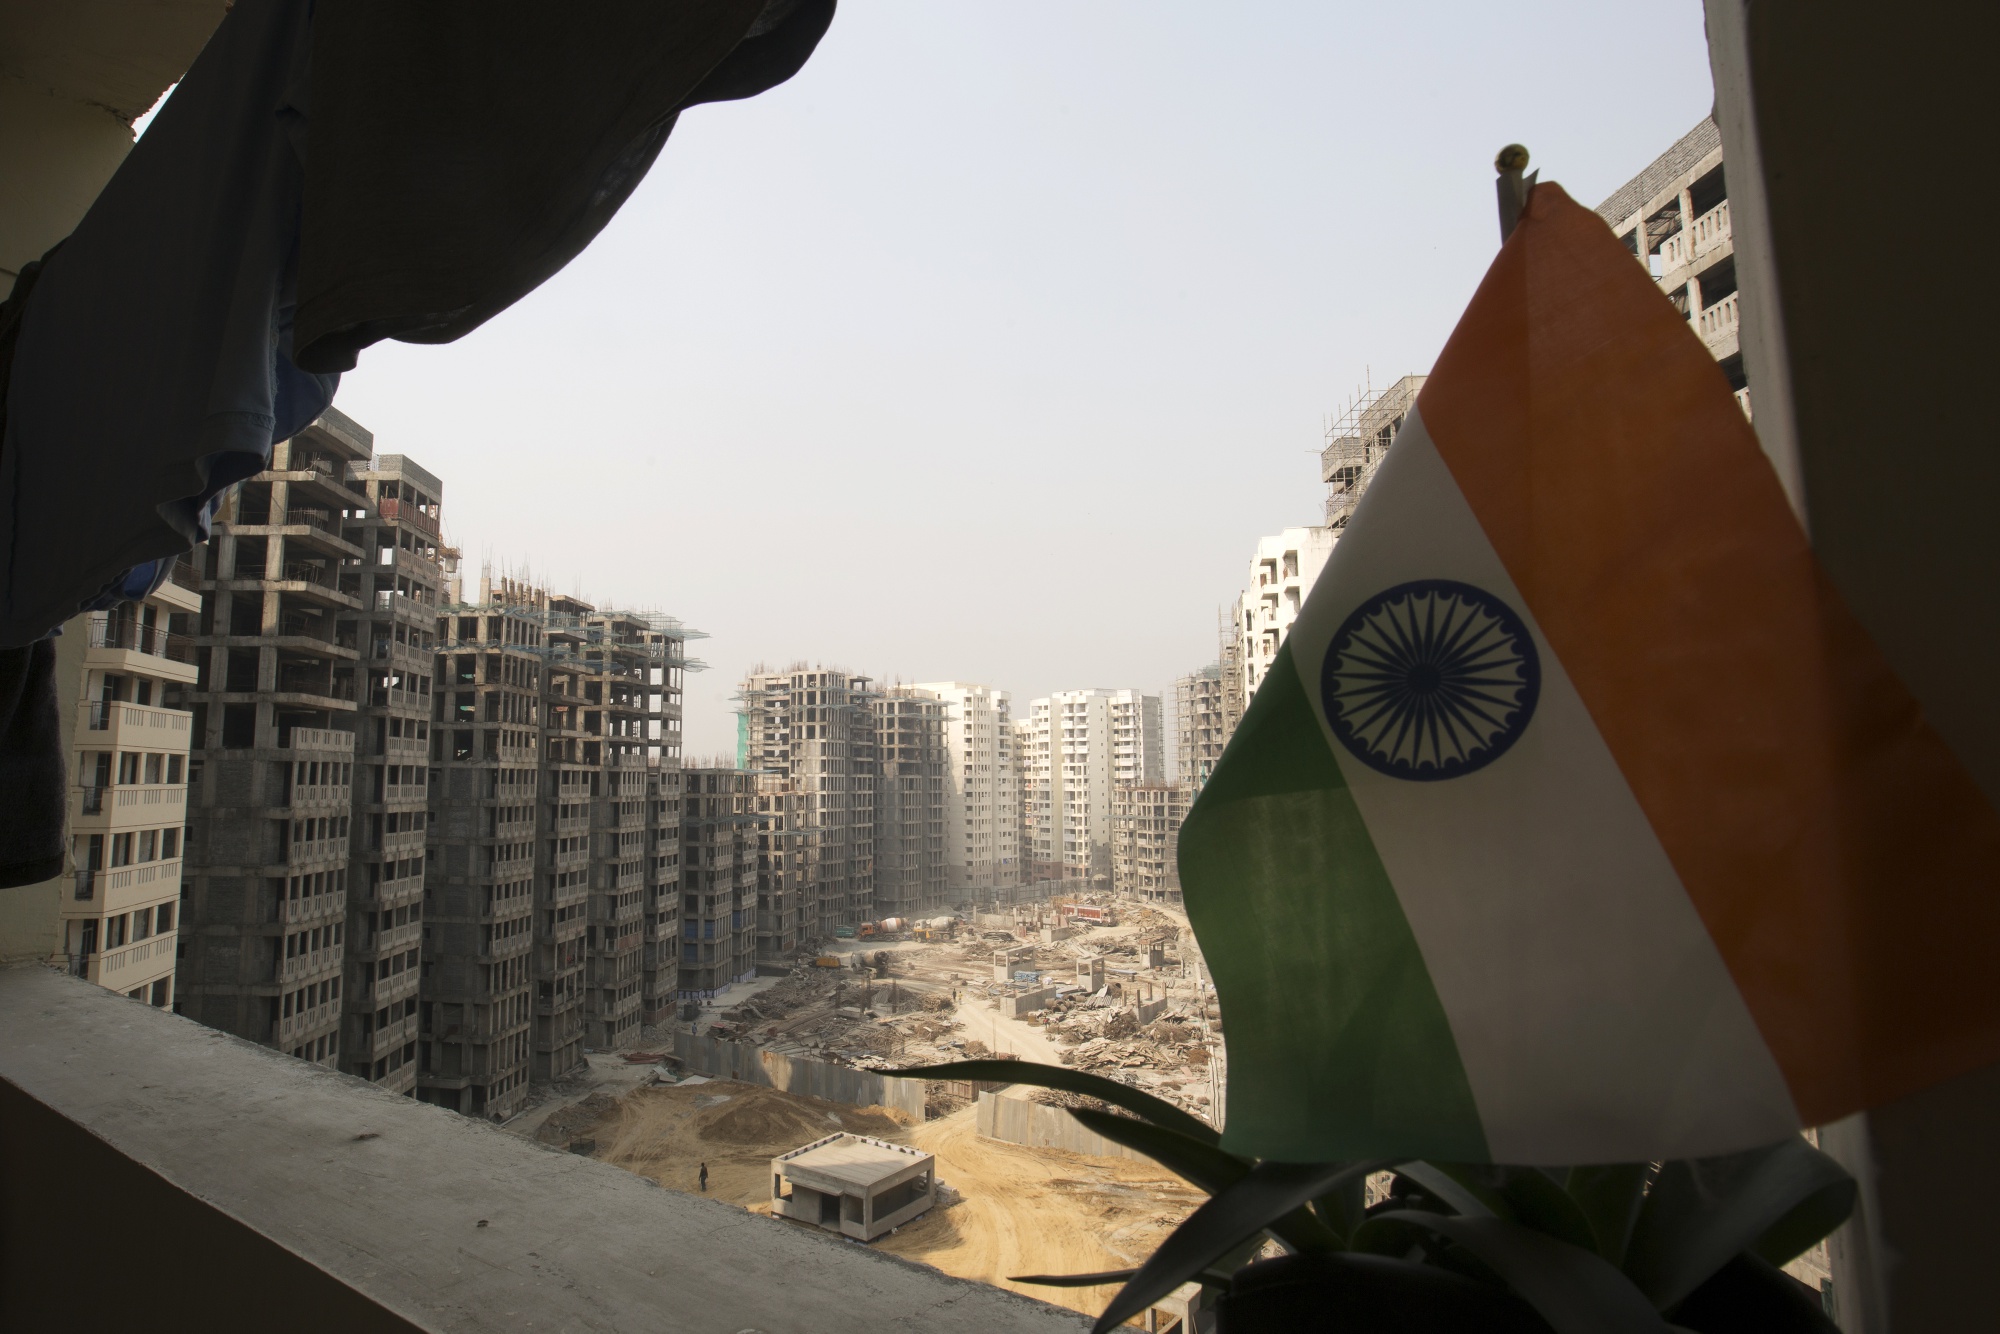 Will Future Megacities Be a Marvel or a Mess? Look at New Delhi